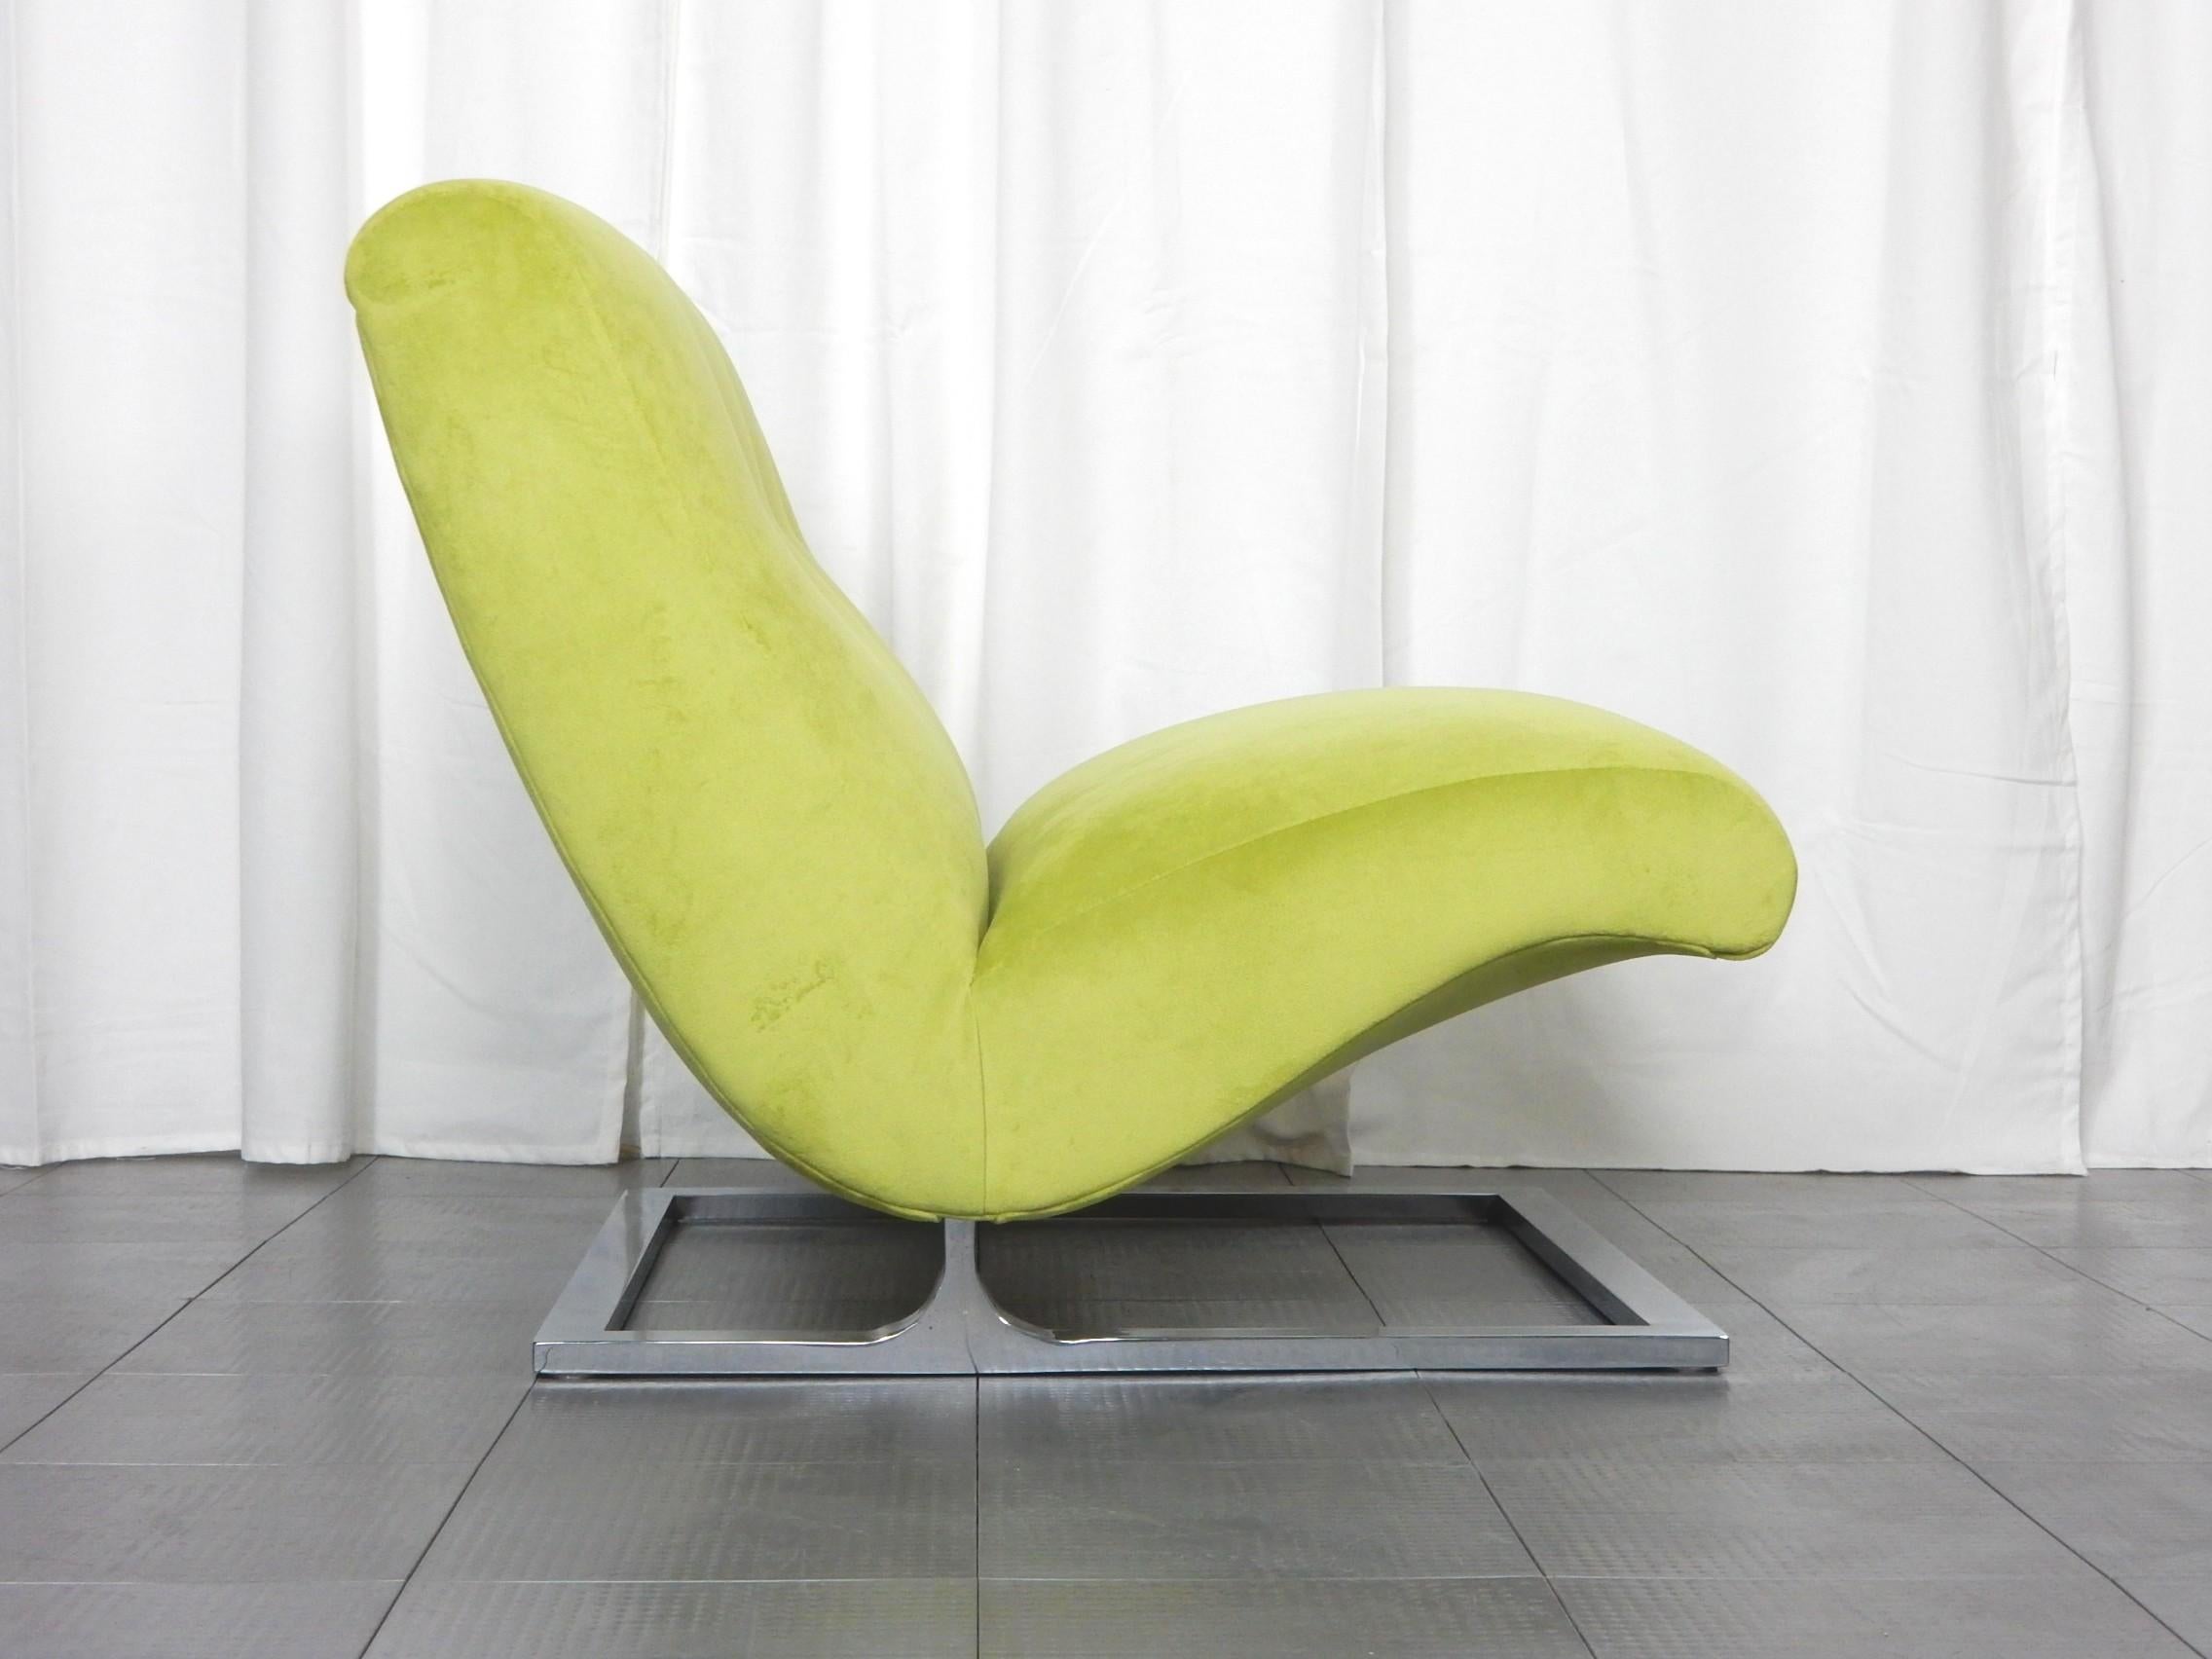 Vintage Scoop Cantilever Lounge Chairs 1970's In Good Condition For Sale In Las Vegas, NV